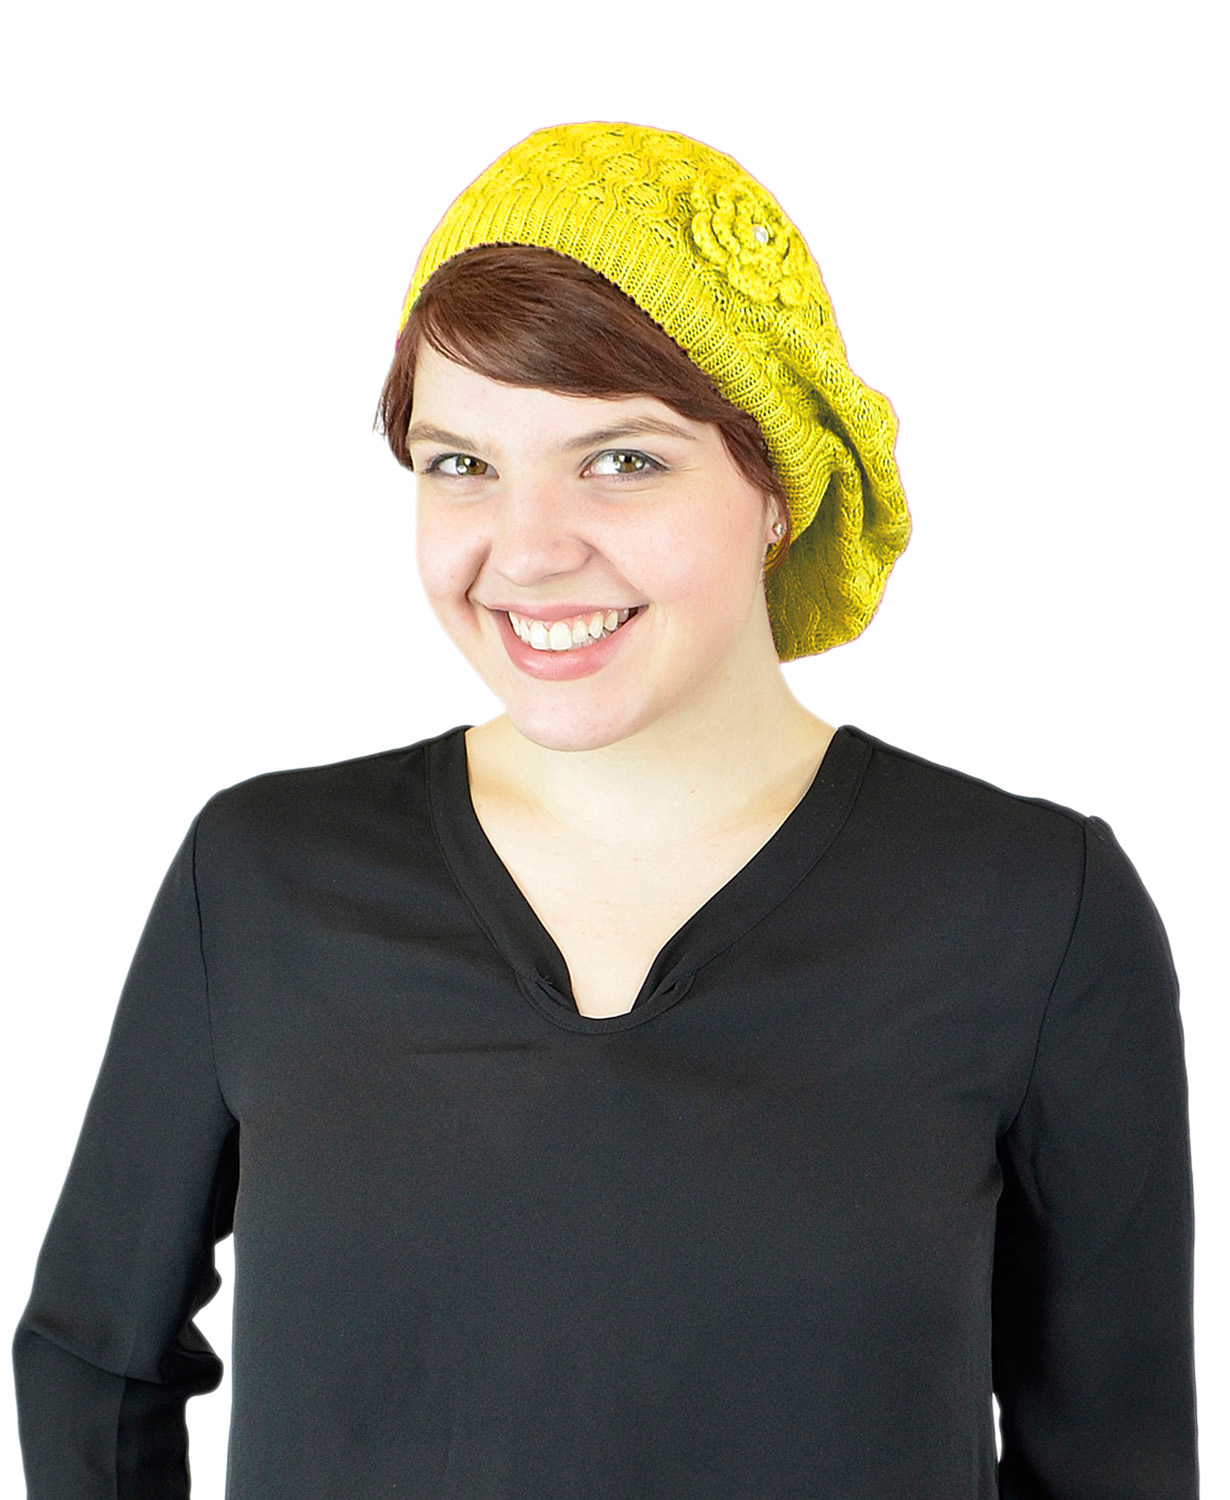 Belle Donne - Women's Mesh Crocheted Accented Stretch Beret Hat- Yellow